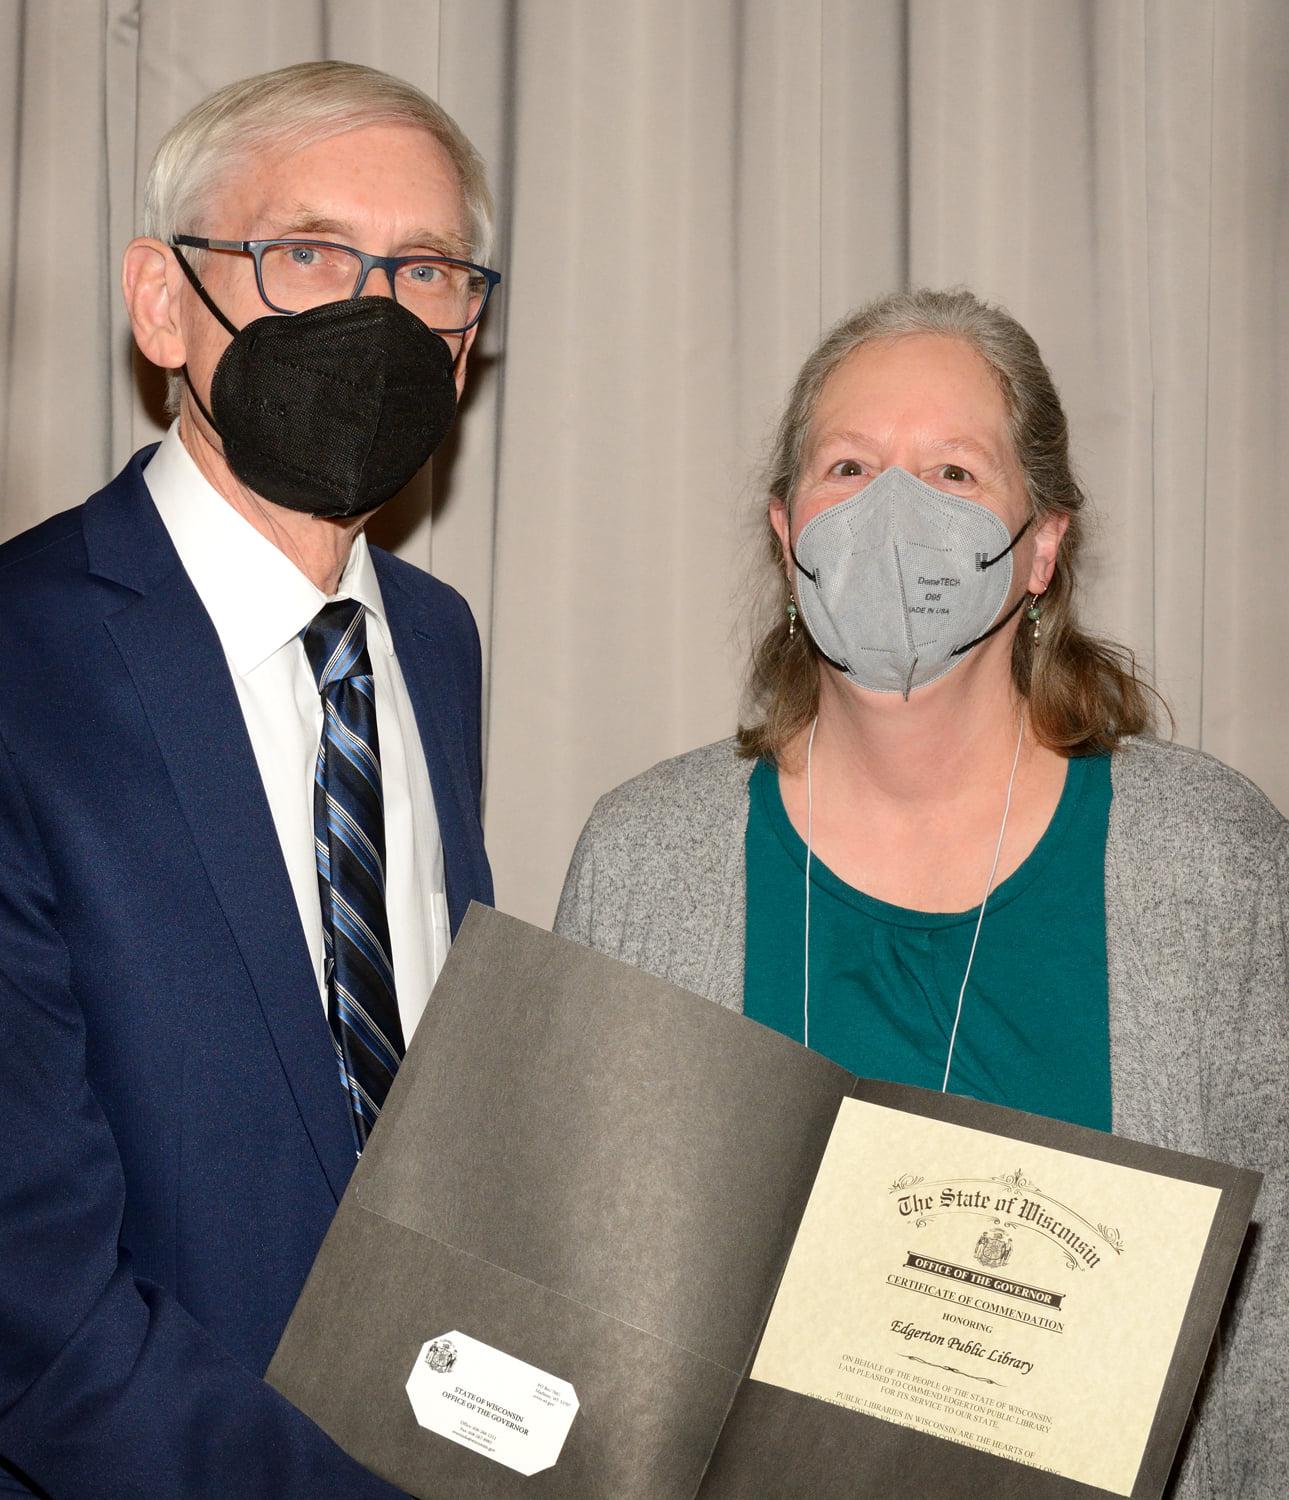 2022 WLA Library Legislative Day. Governor Tony Evers presents certificate to Kirsten Almo, Director of Edgerton Public Library.